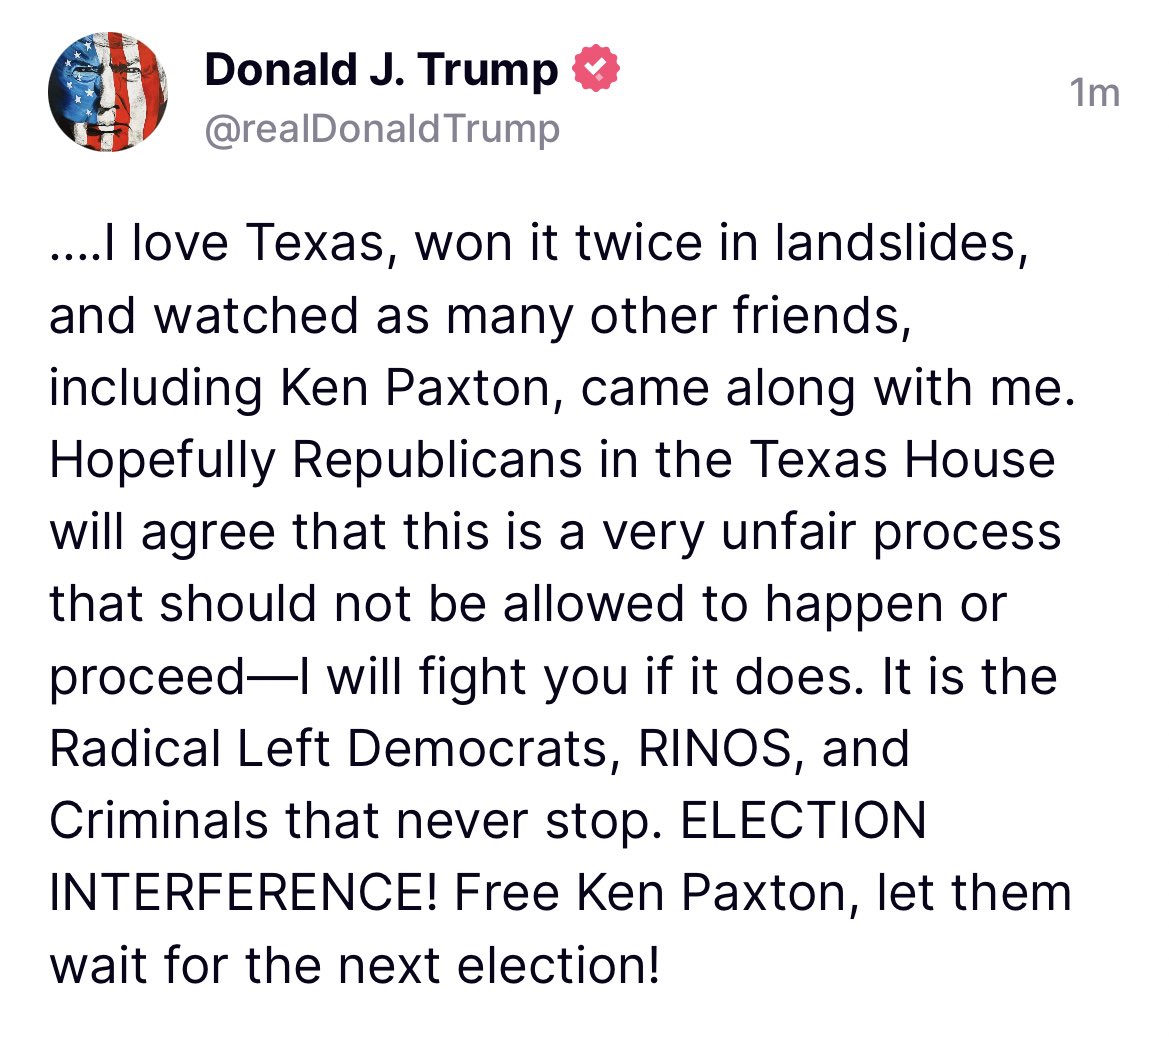 And there it is — Less than half an hour before the Paxton impeachment debate is set to start in the House, Trump weighs in against it “Free Ken Paxton, let them wait for the next election!” #txlege